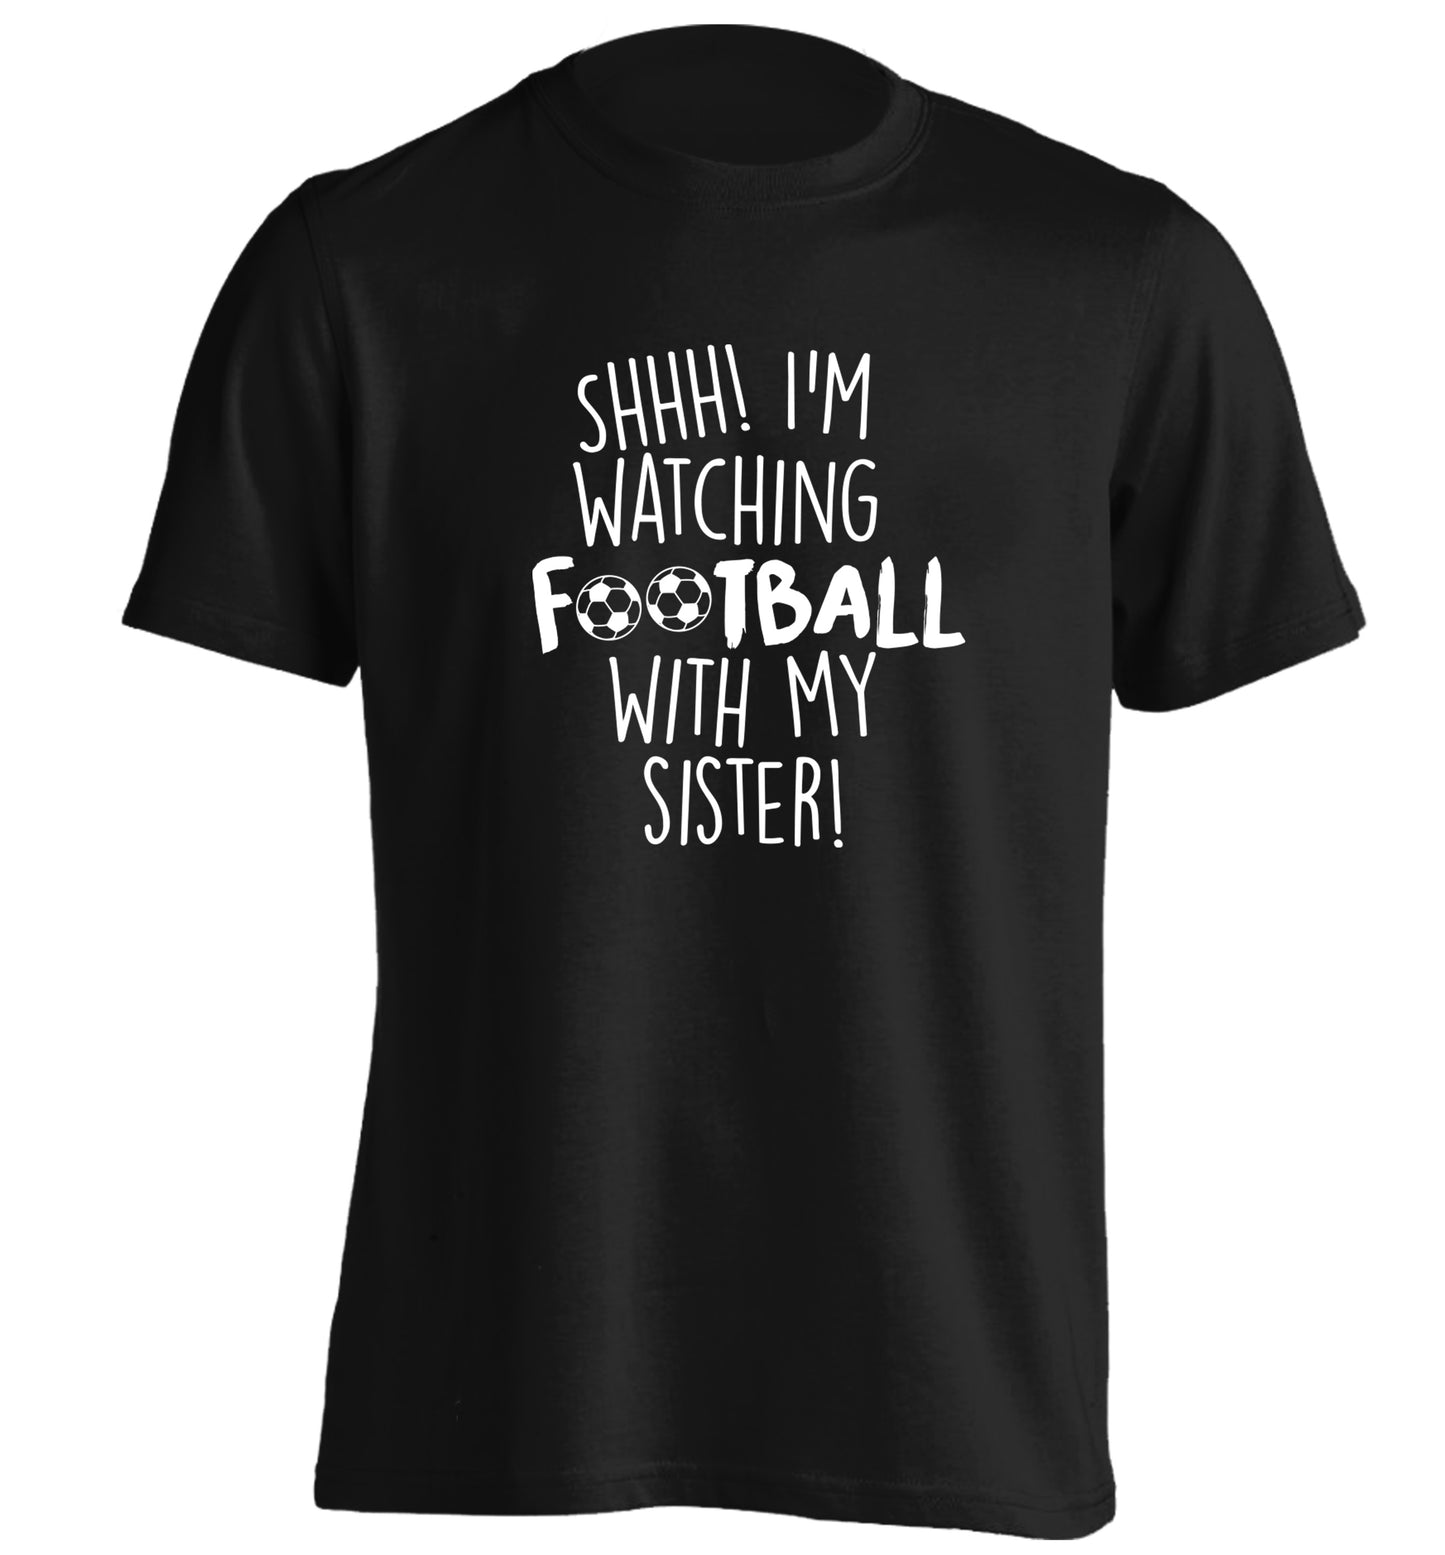 Shhh I'm watching football with my sister adults unisexblack Tshirt 2XL